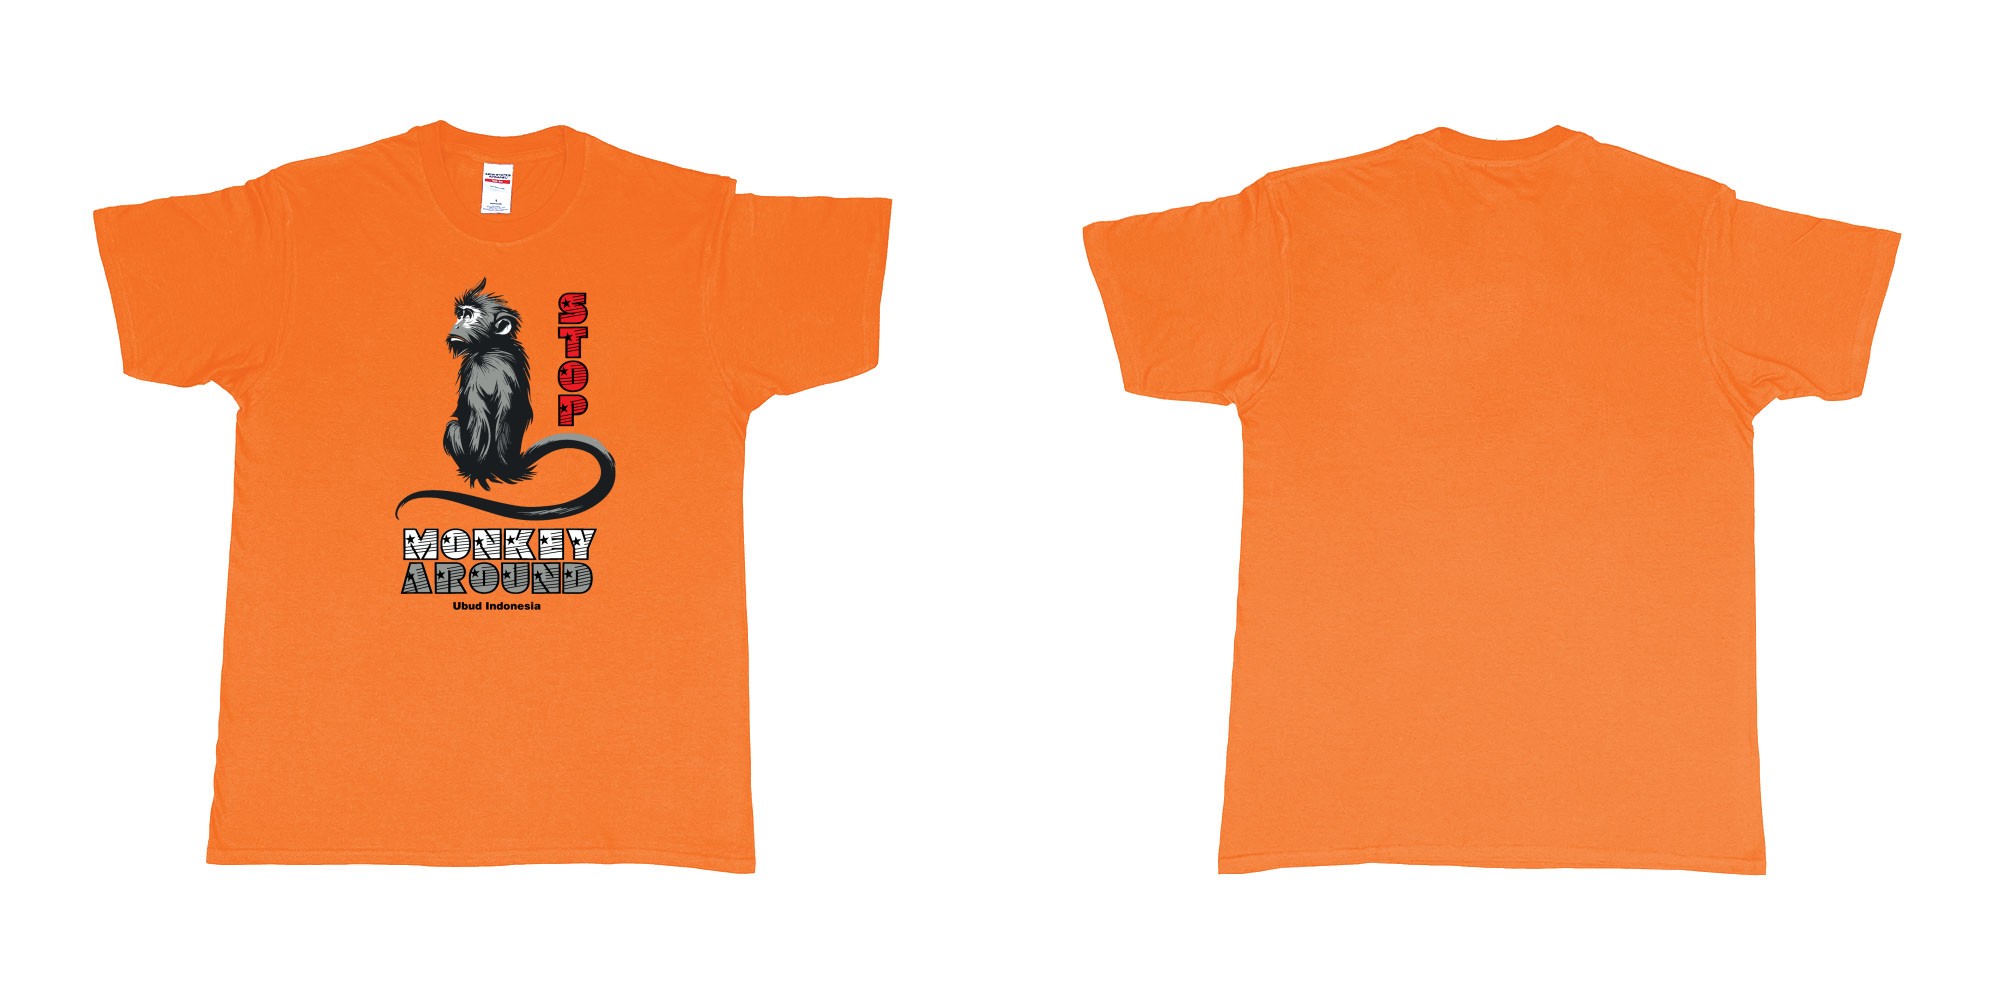 Custom tshirt design stop monkey around long tailed macaque ubud bali monkey forest in fabric color orange choice your own text made in Bali by The Pirate Way